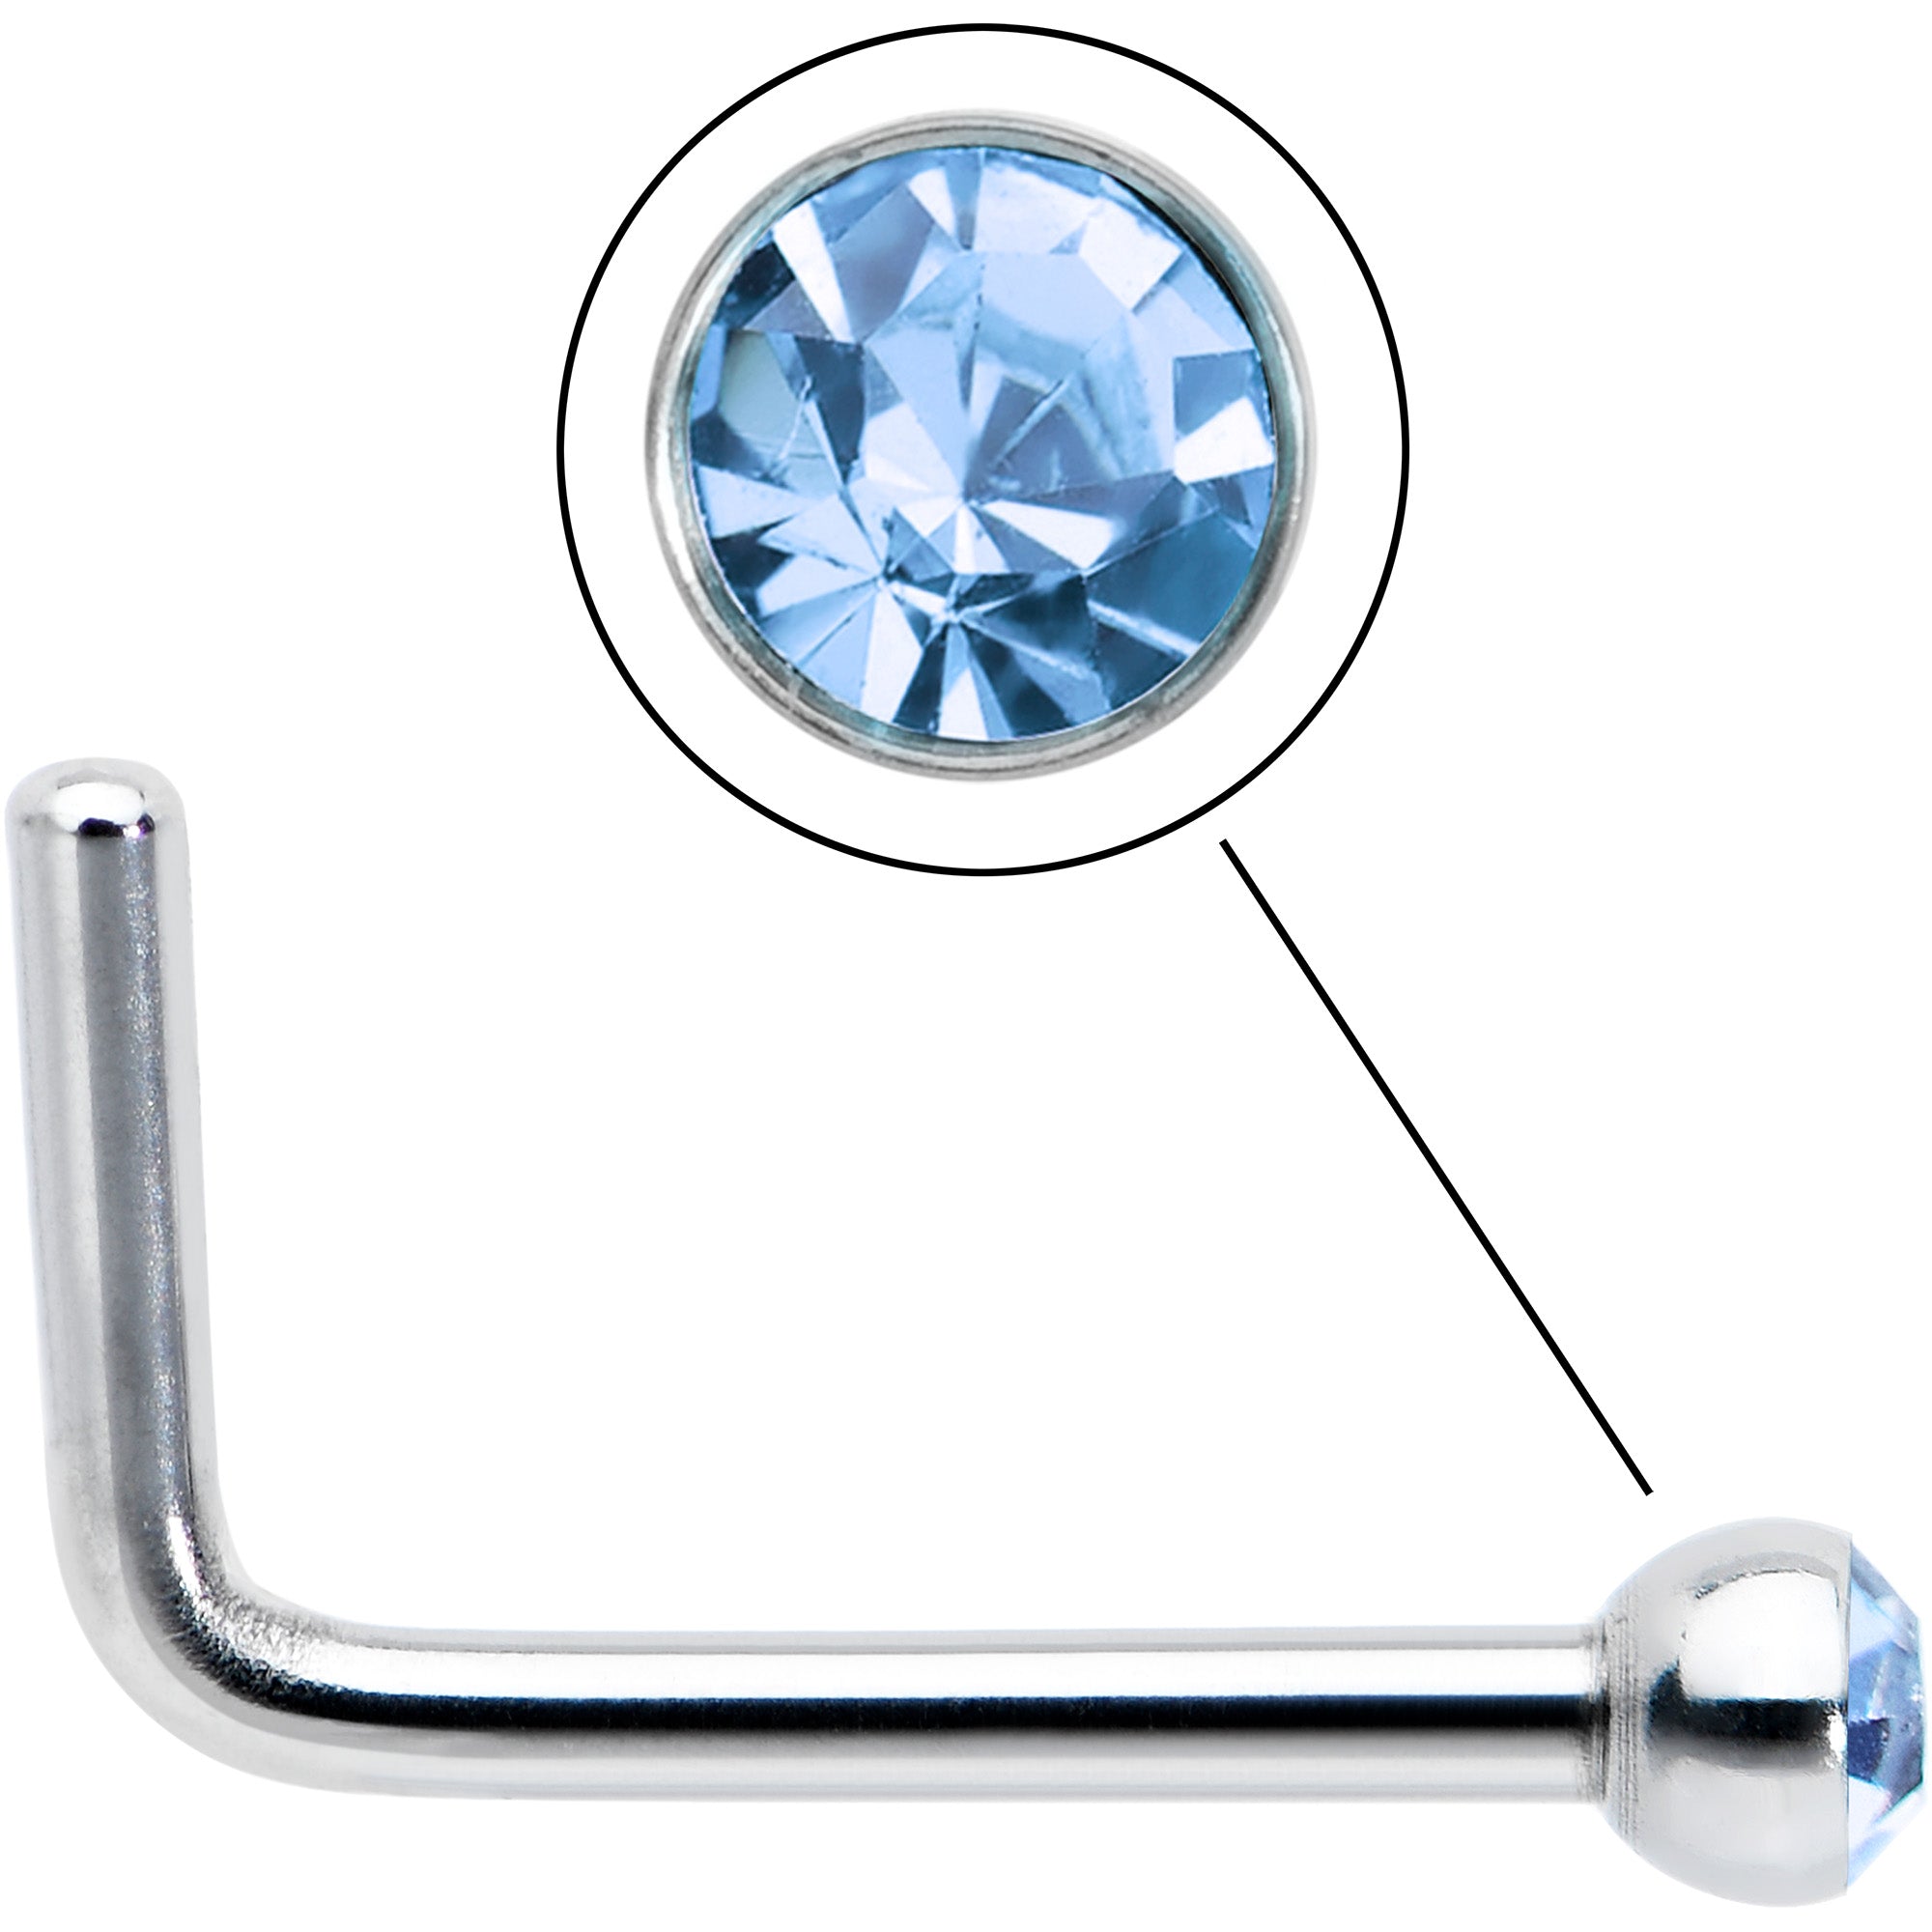 20 Gauge Stainless Steel Light Blue Gem Micro Nose Ring L-Shaped